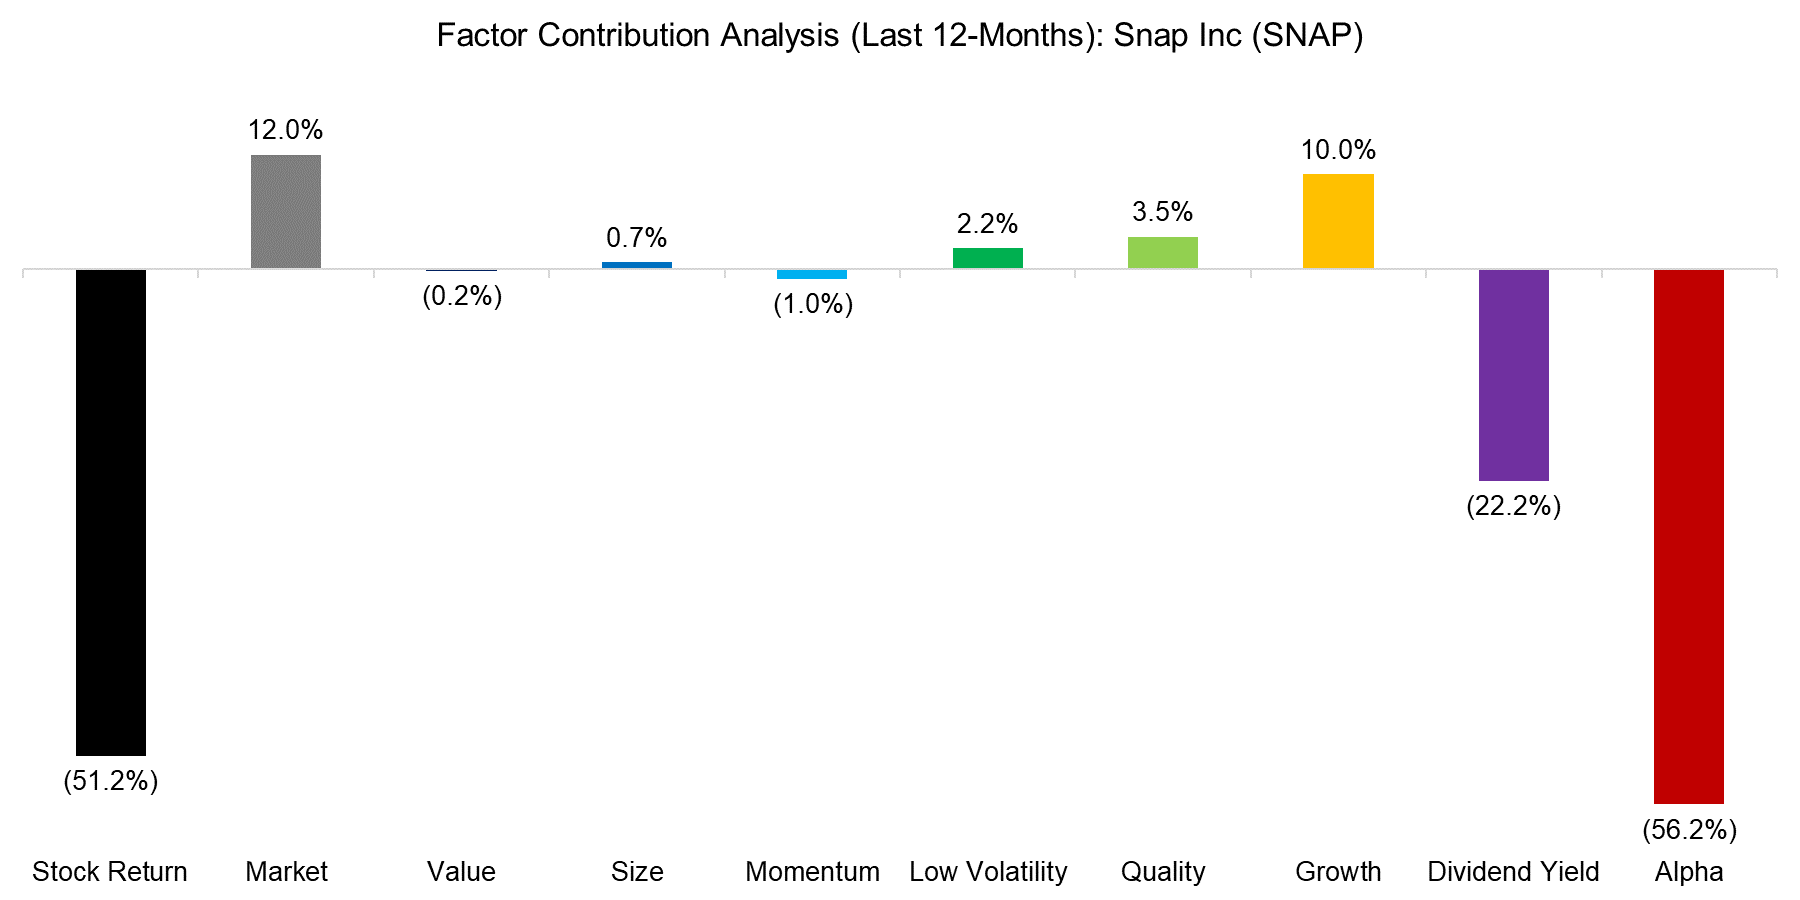 Factor Contribution Analysis (Last 12-Months) Snap Inc (SNAP)